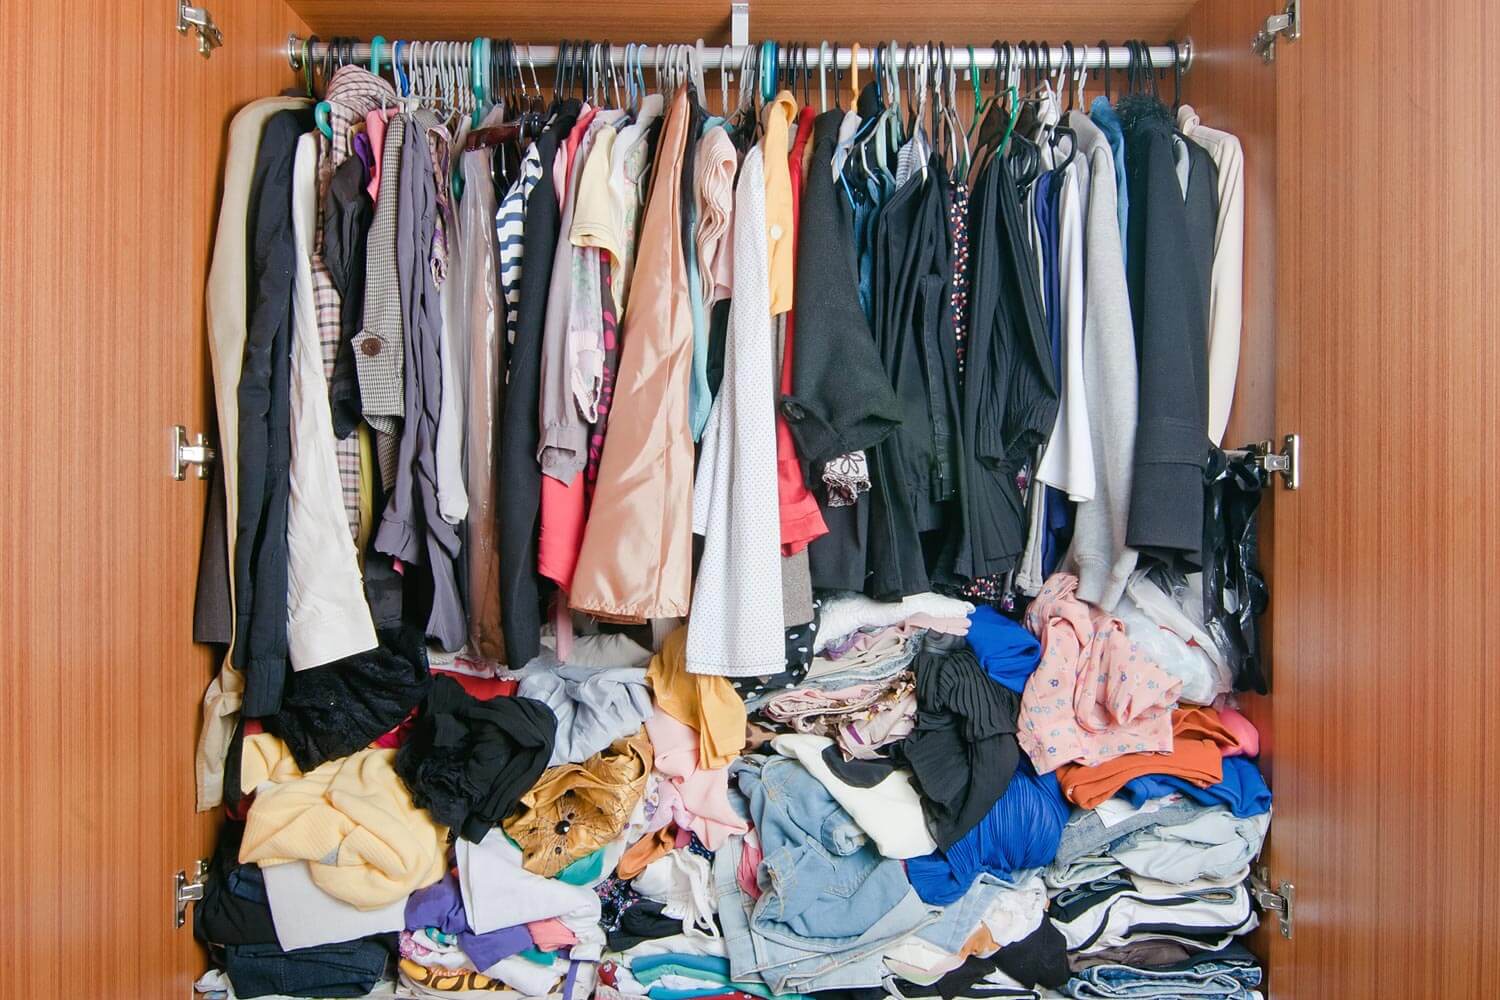 clothes stuffed in a closet with clothes piled below on the floor